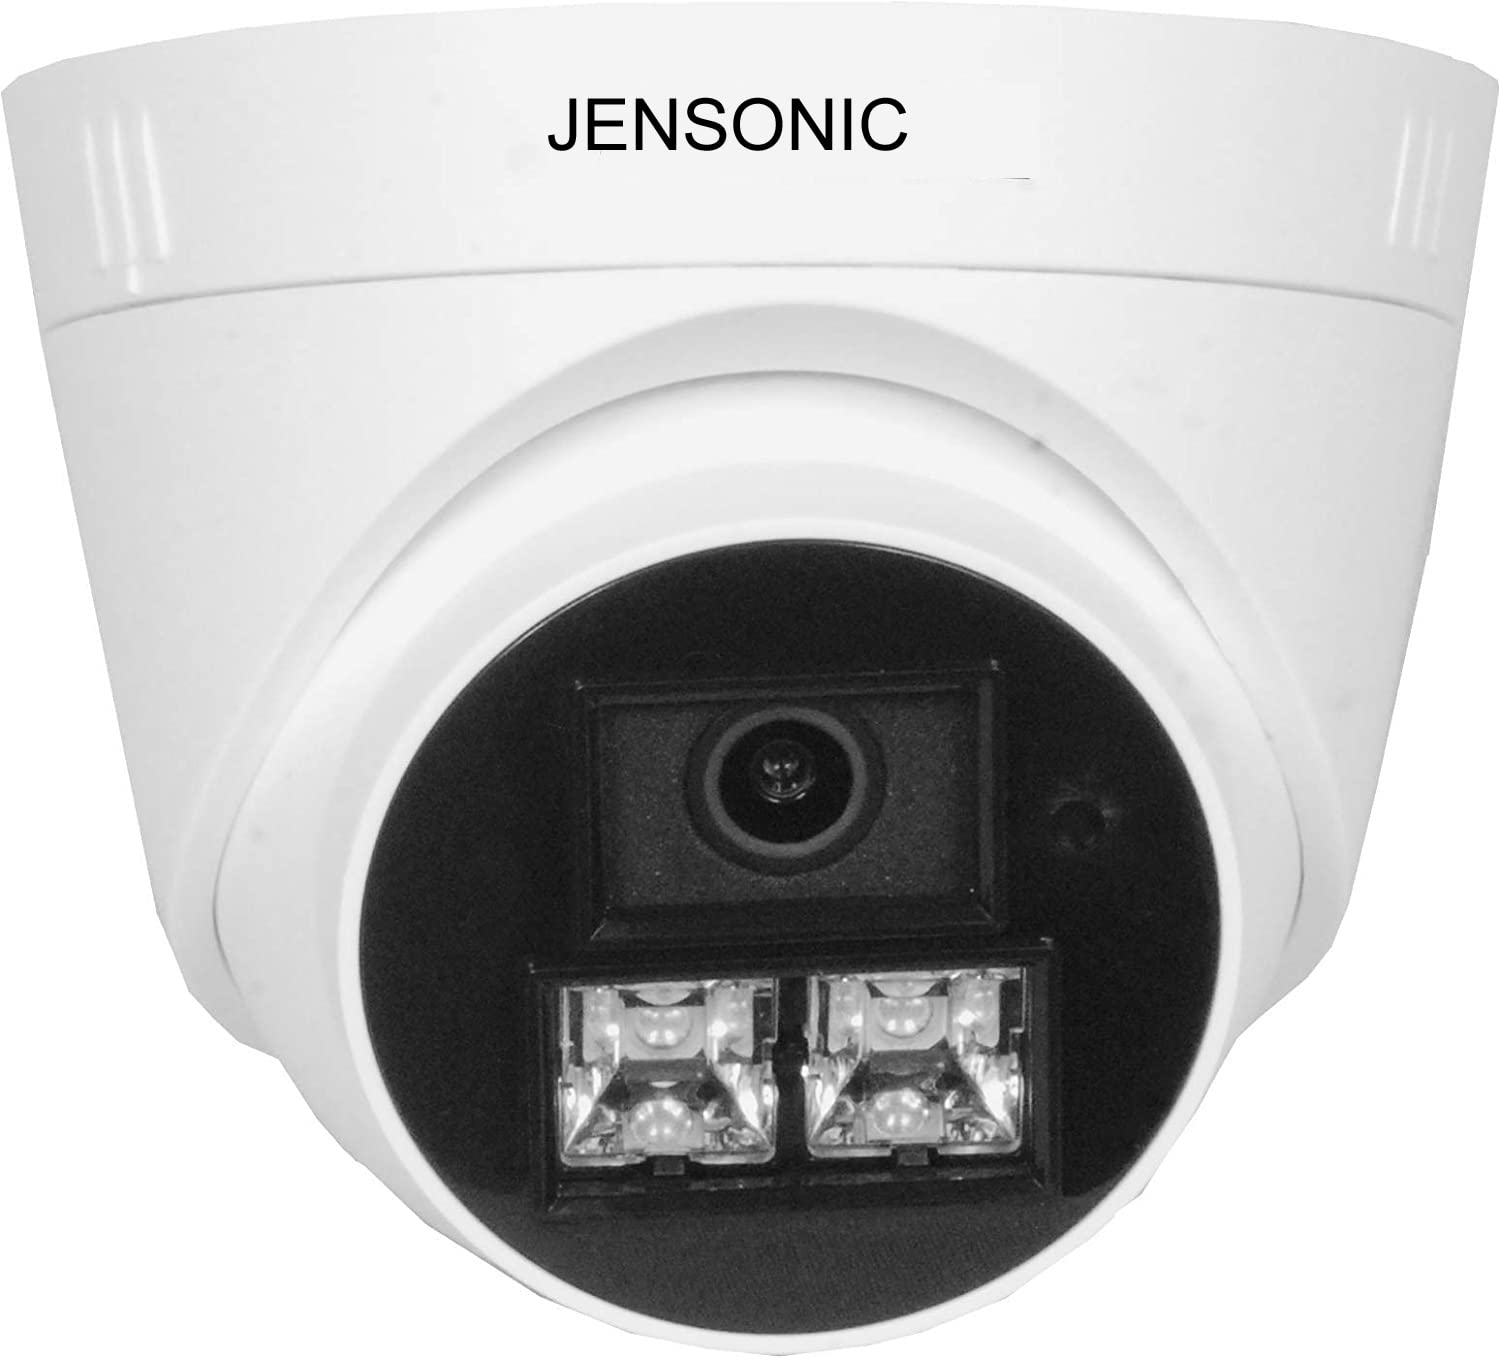 Jensonic Wired 1080p FHD 2MP